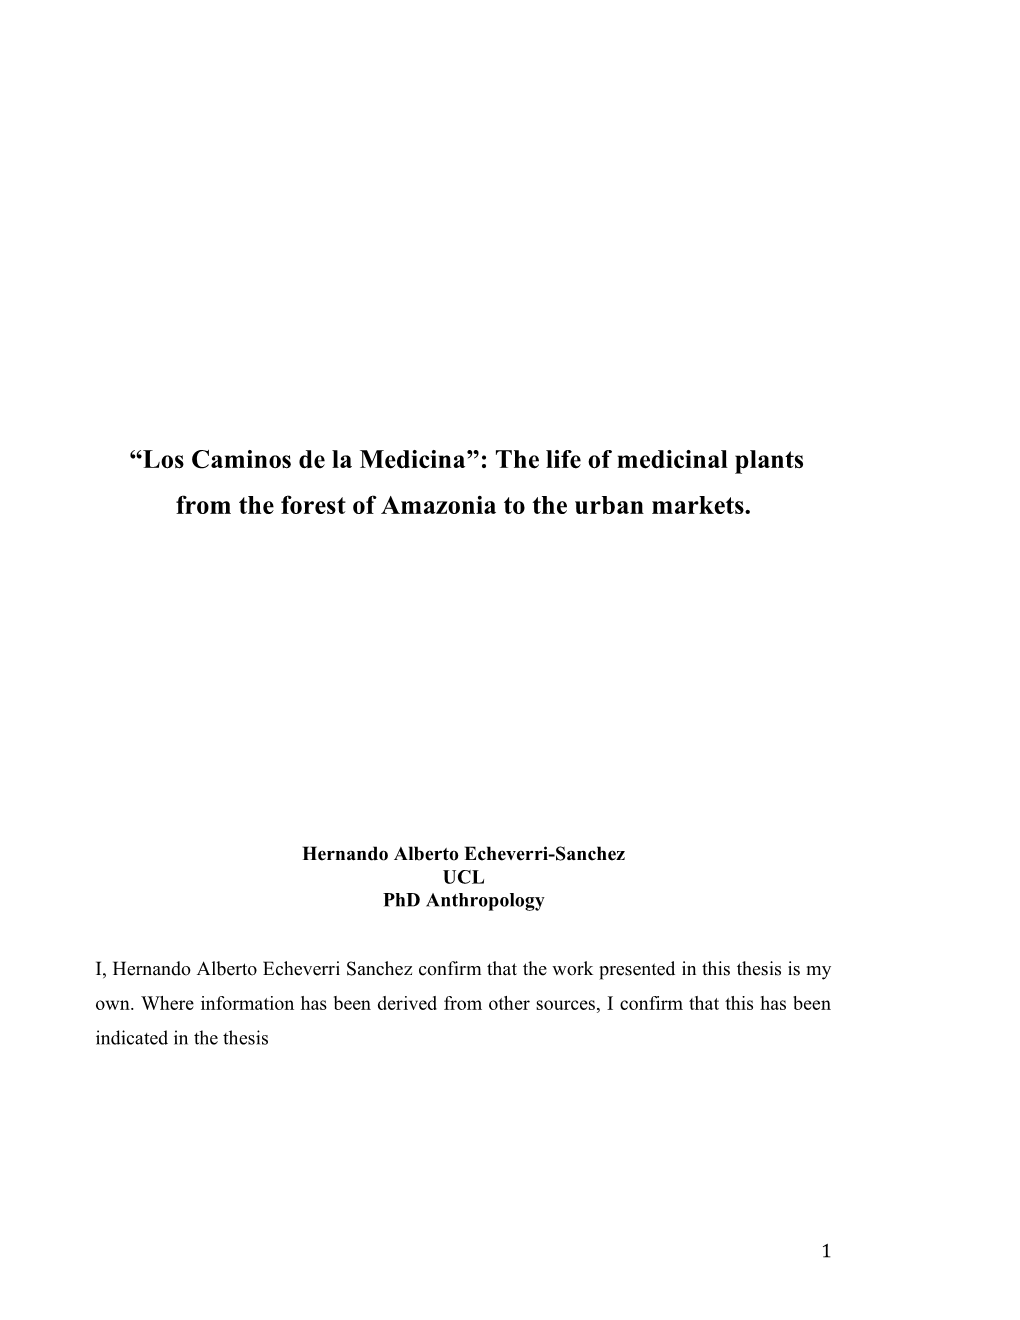 The Life of Medicinal Plants from the Forest of Amazonia to the Urban Markets